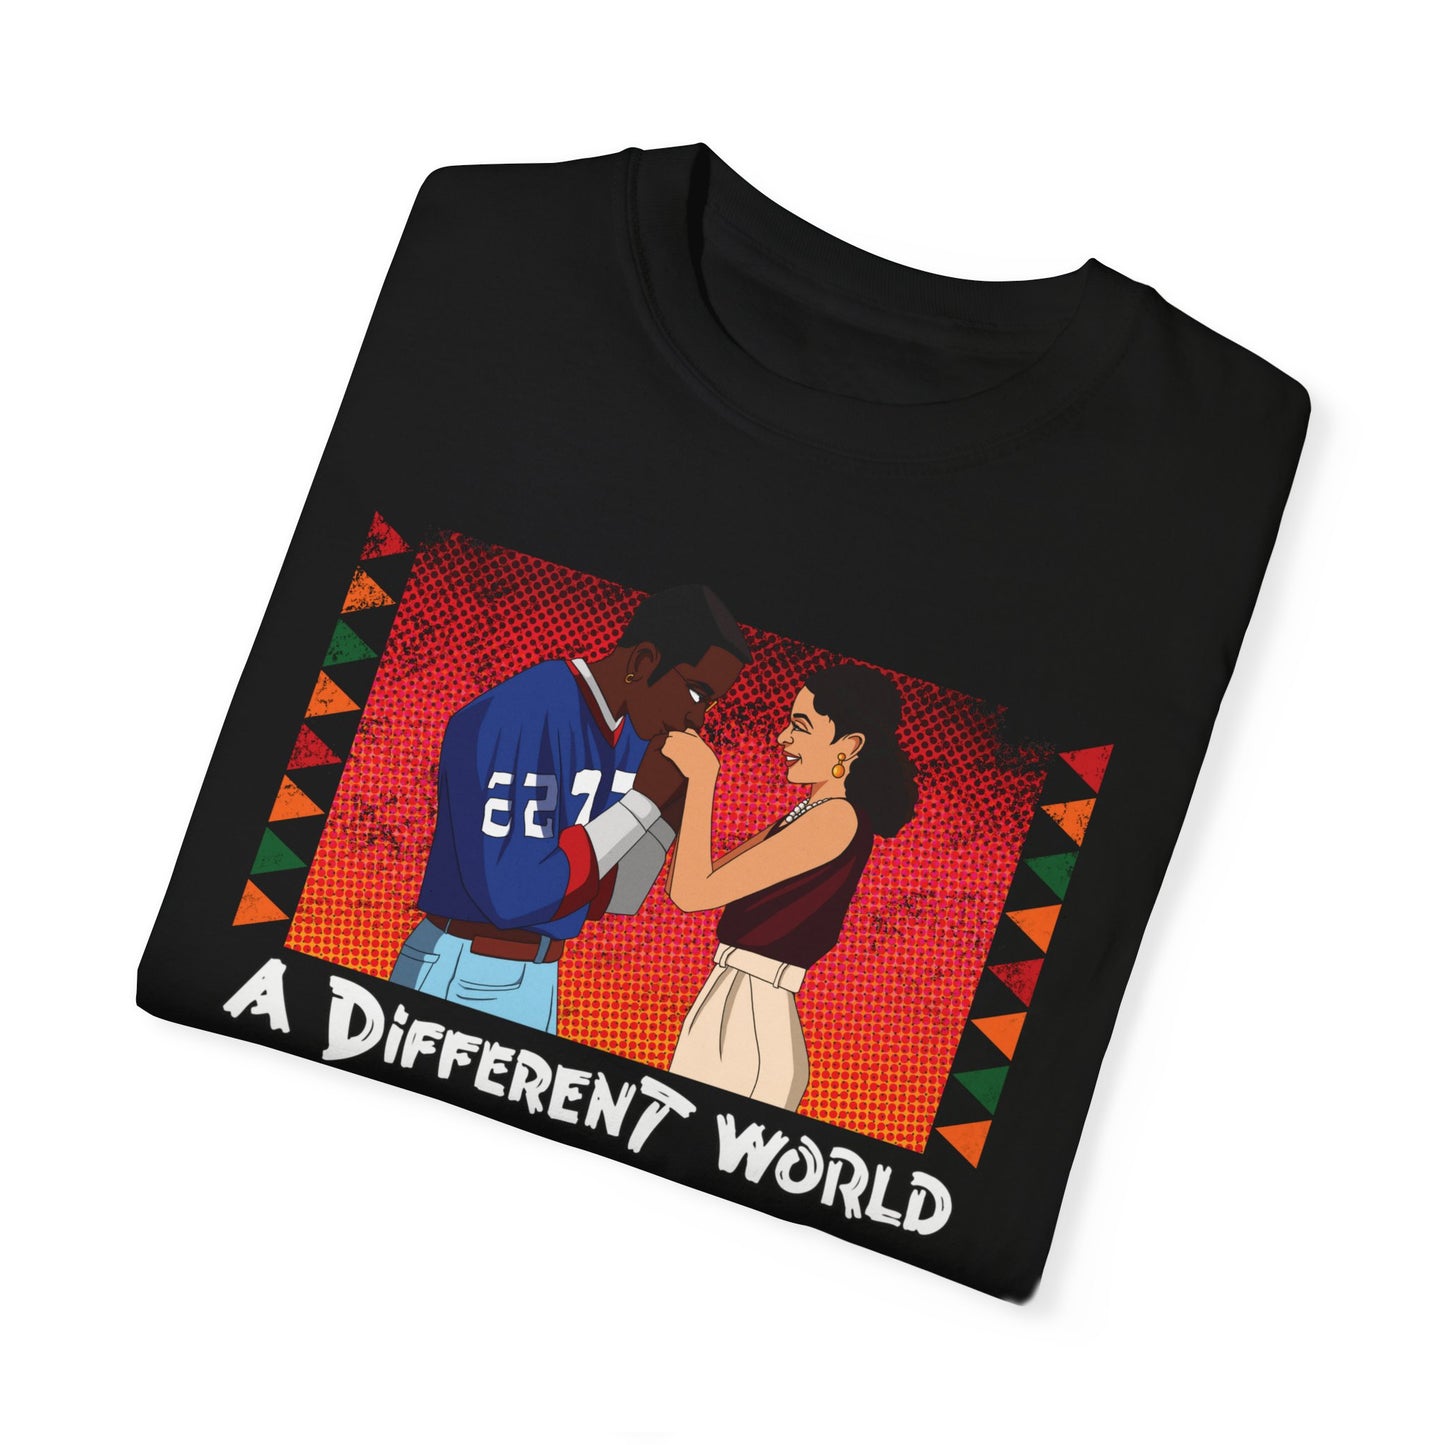 Baby Please (A Different World) T-shirt